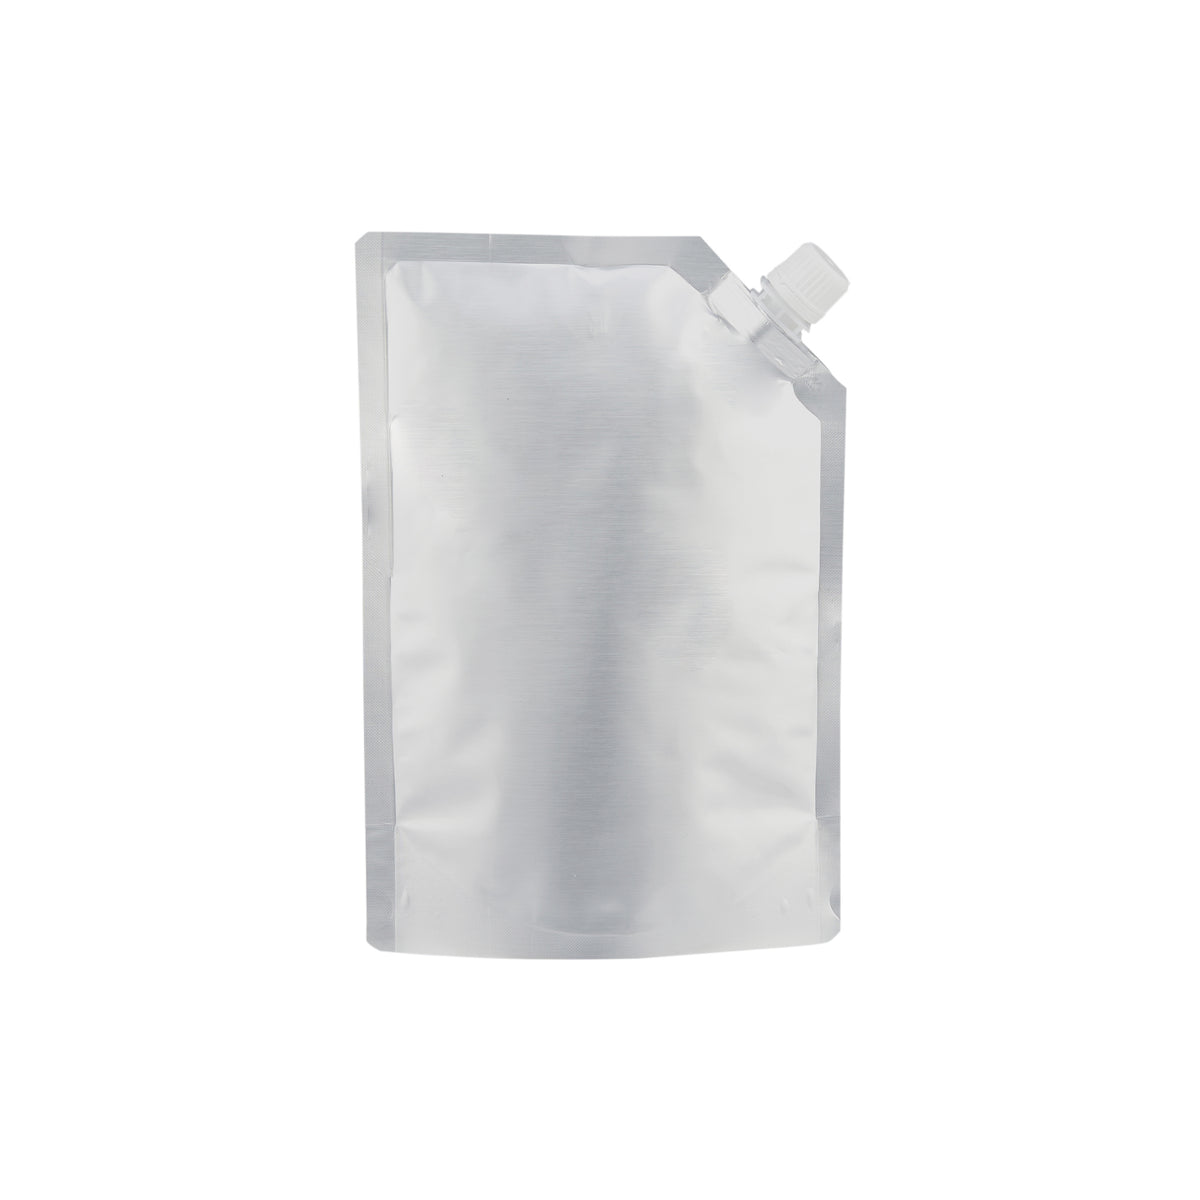 Coffee Bag Stand Up Spout Pouch - Hotpack Global